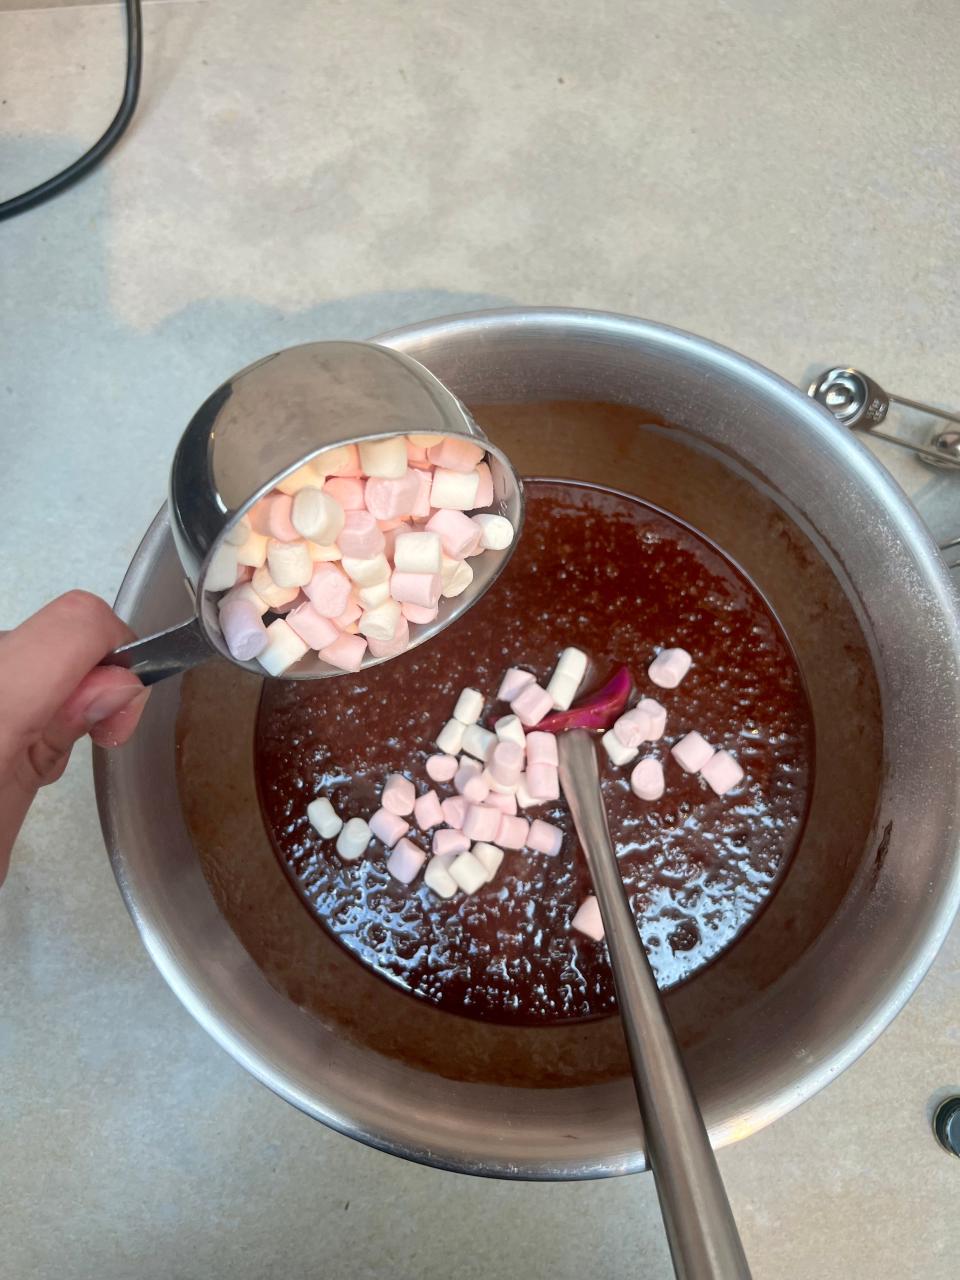 The final ingredient of the batter is tiny marshmallows.